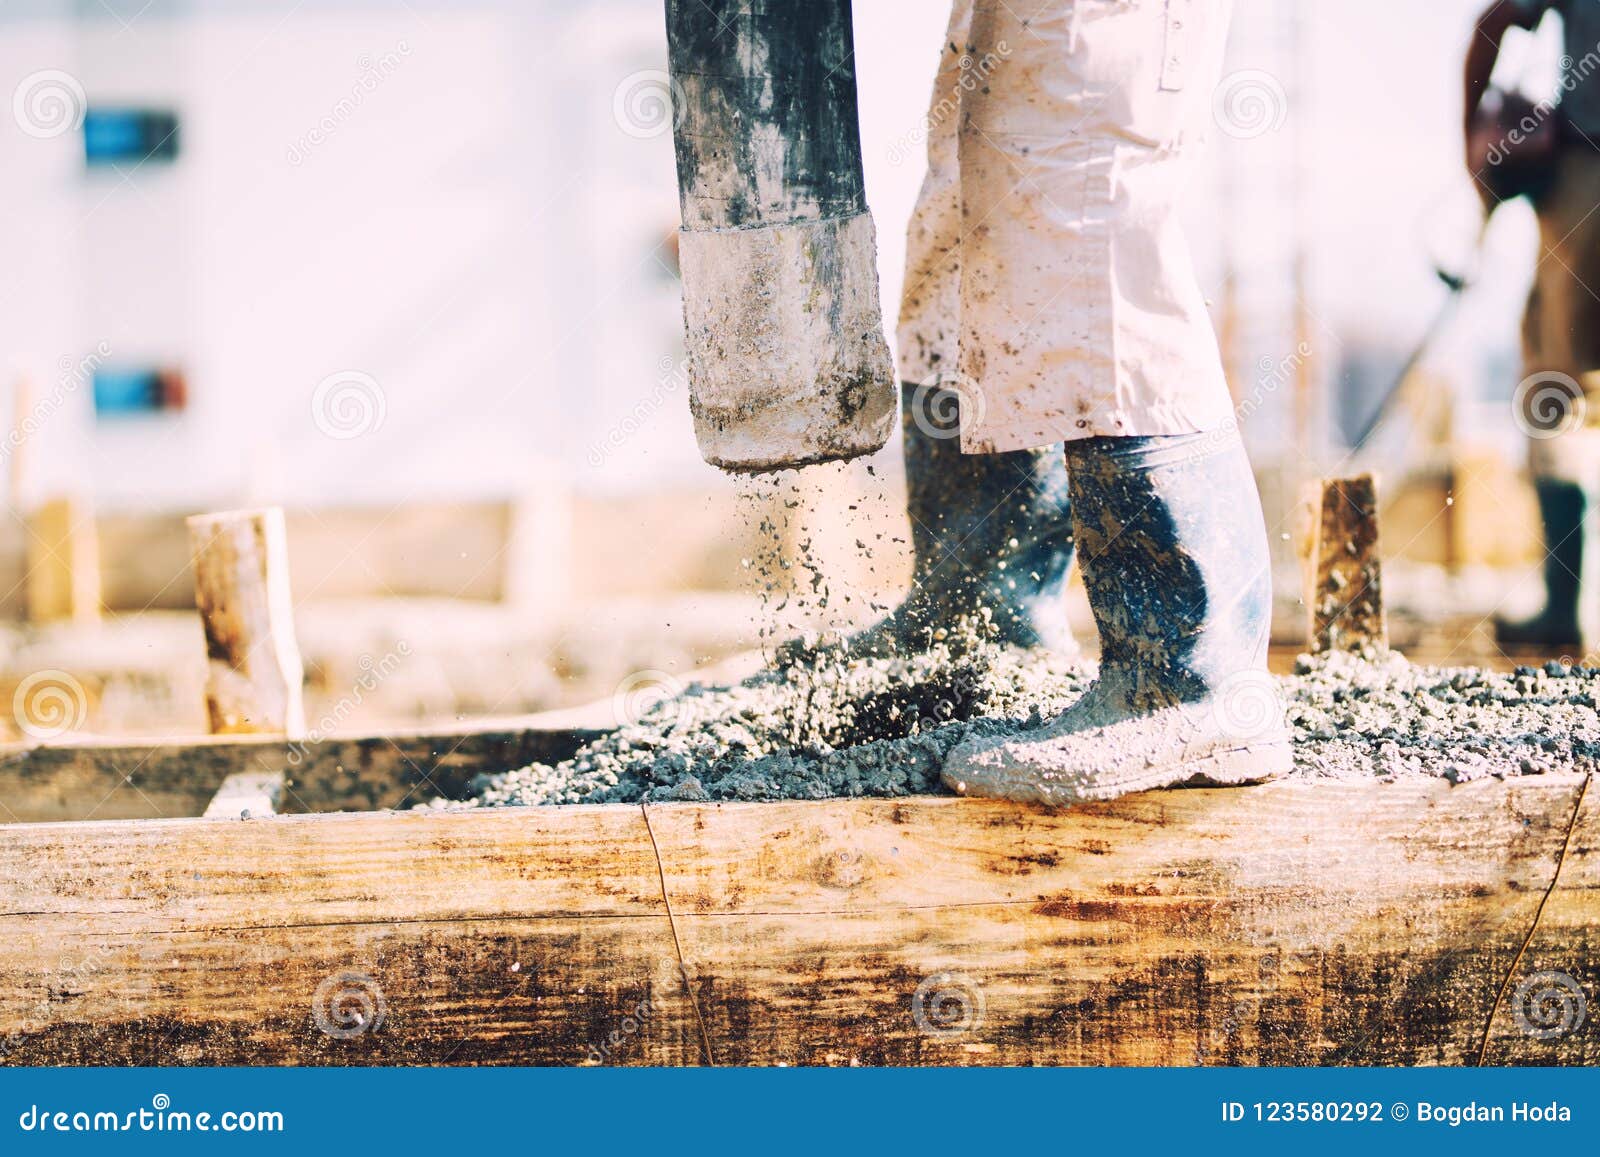 constuction details - worker laying cement or concrete with automatic pump